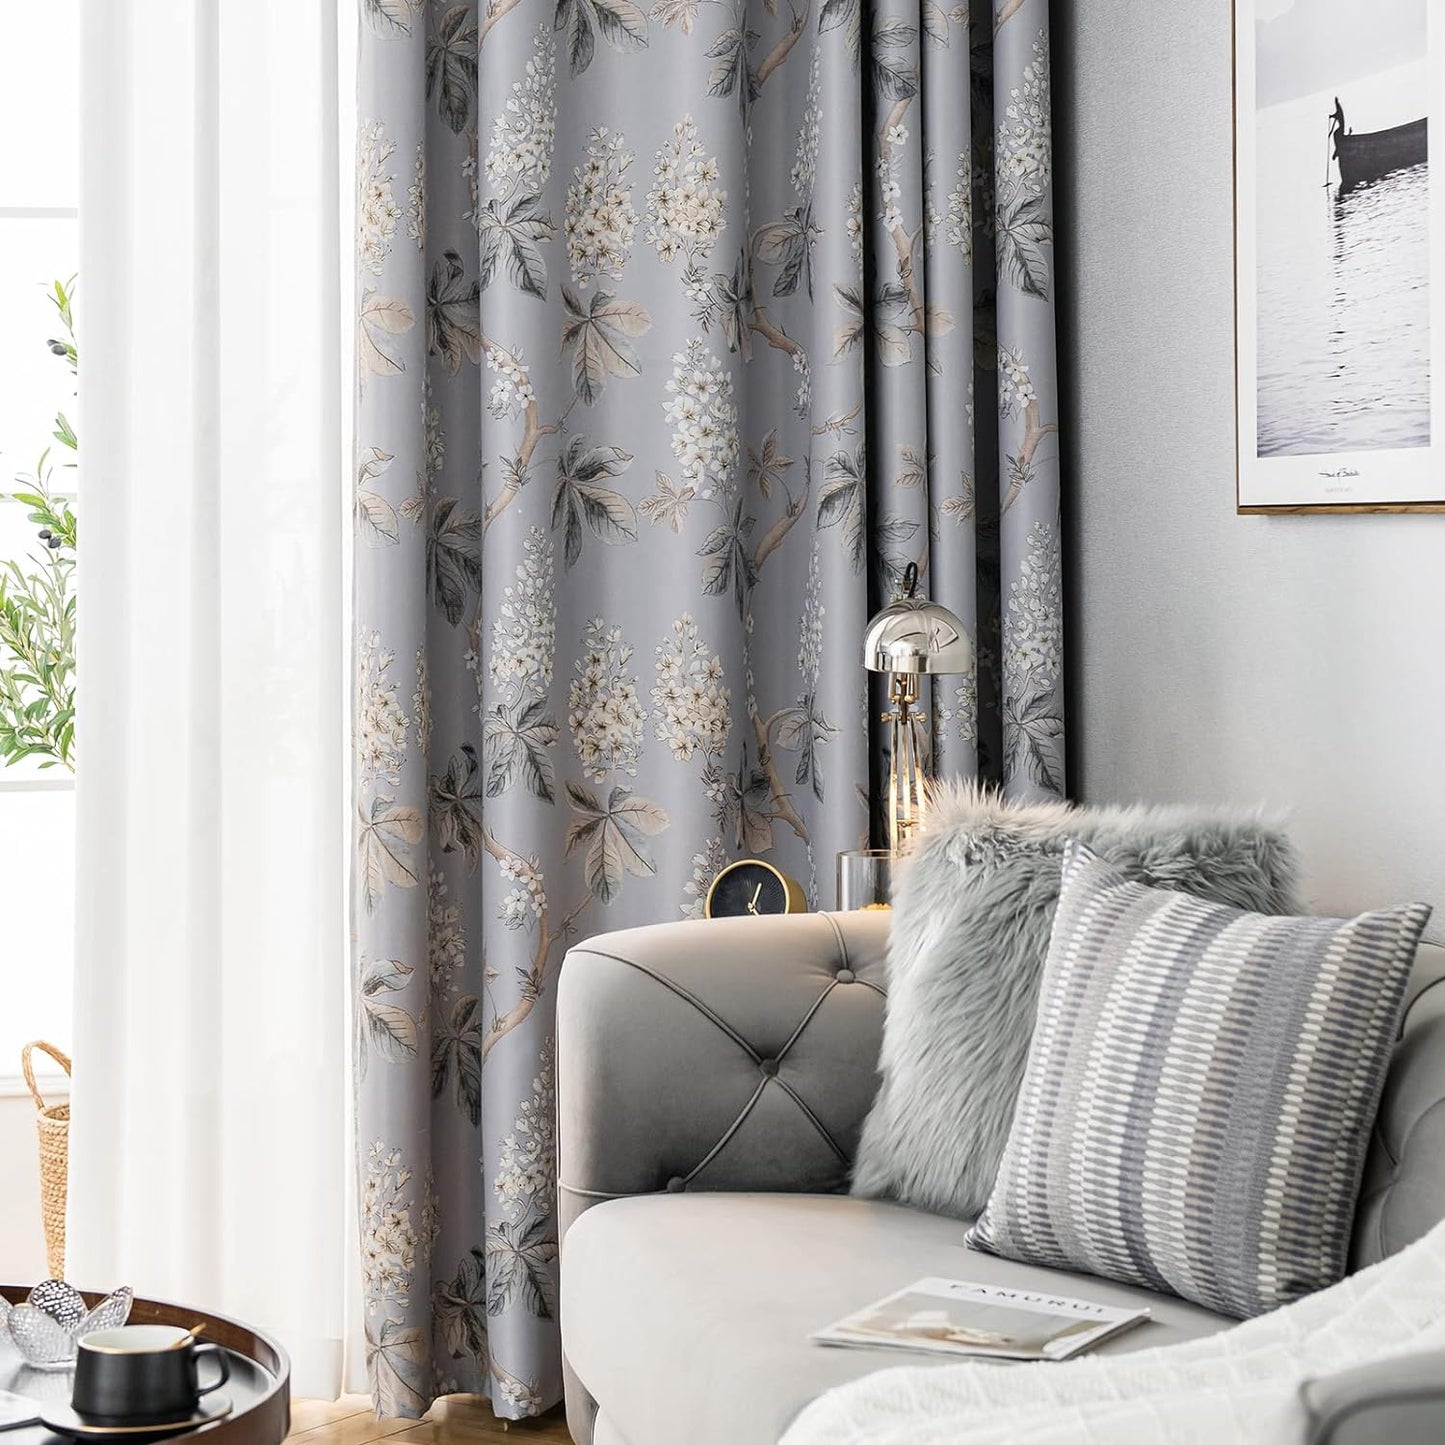 Double Sided Floral Blackout Curtains for Bedroom Patterned Vintage Flower Thermal Insulated Window Drapes Room Darkening for Living Room 2 Panels 84 Inches Long Blue  SUOUO Front (Grey Color)/Back ( White Color) W52 X L96 Inch,1Pair 